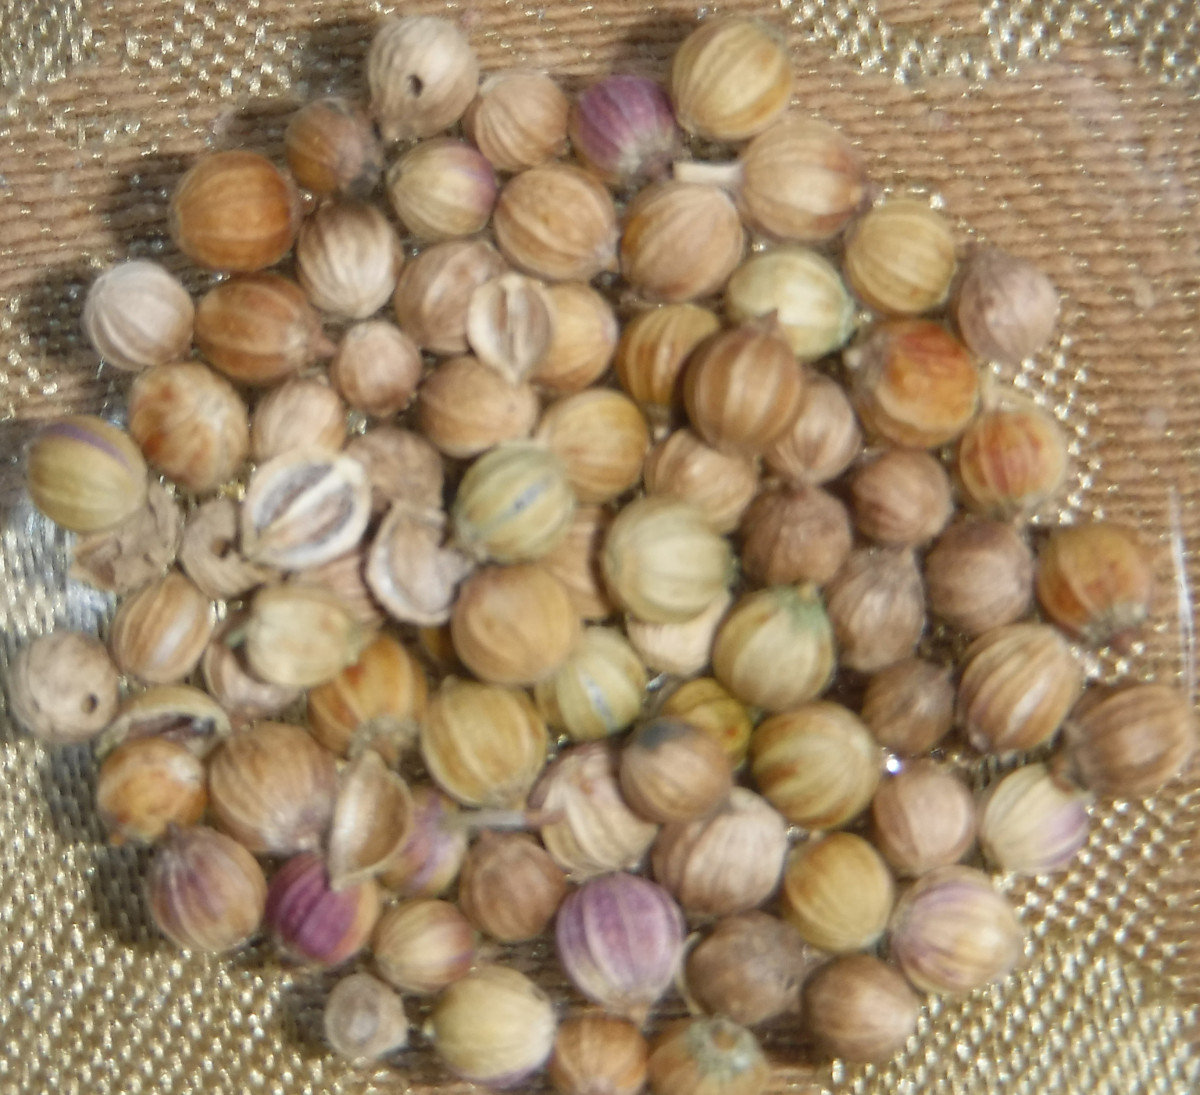 The coriander seeds are the "fruit" of the plant and used as a spice, whole or crushed.